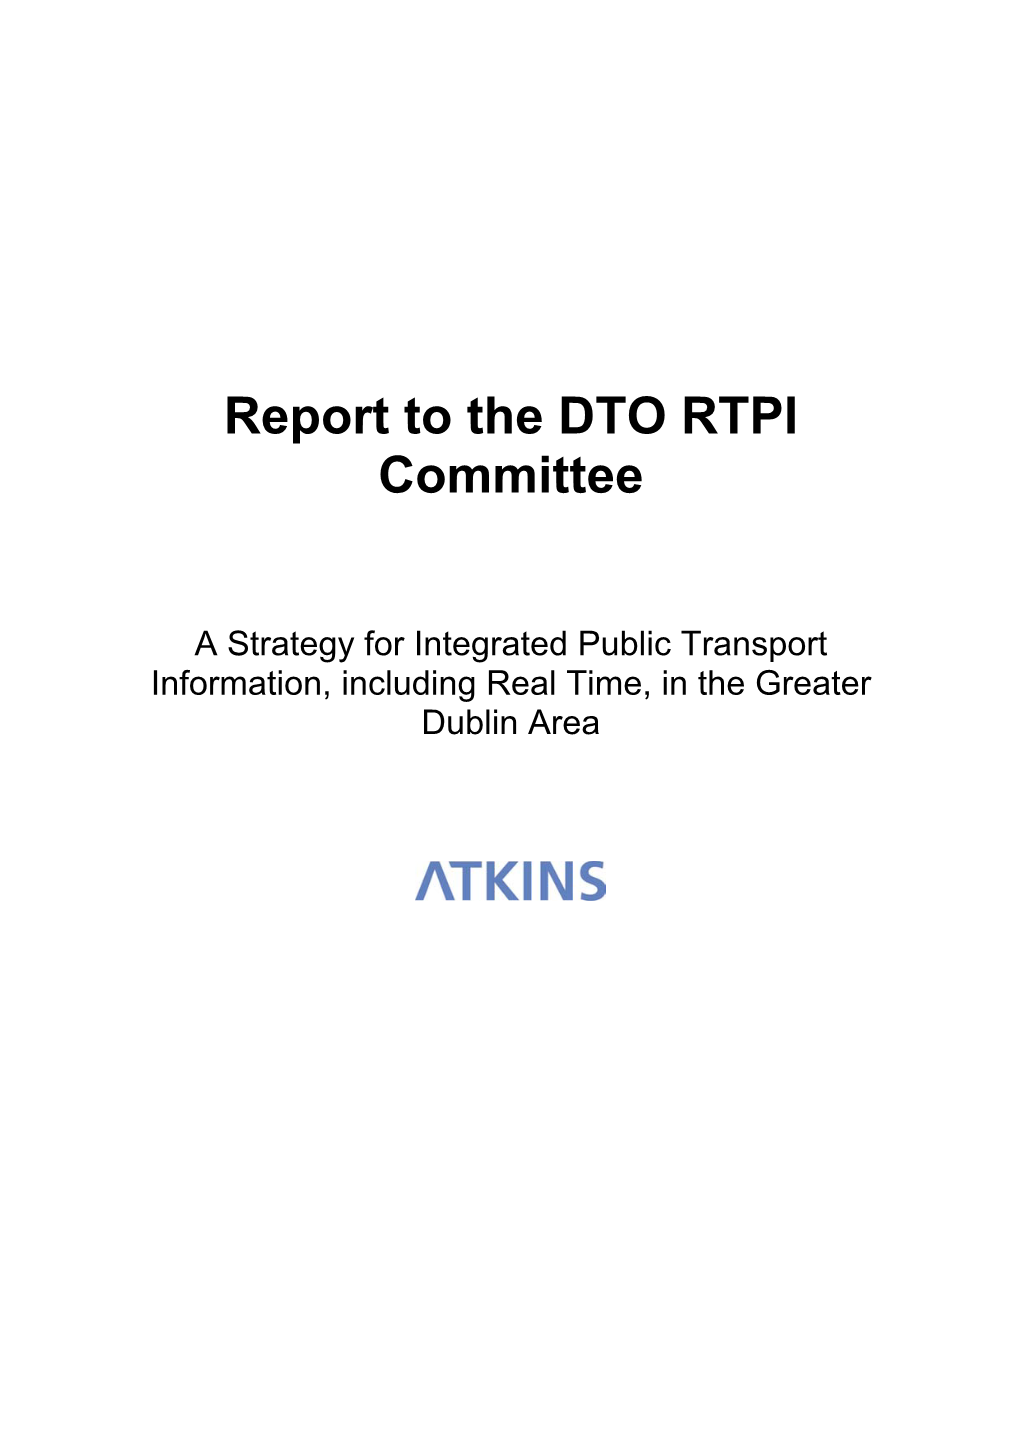 Report to the DTO RTPI Committee